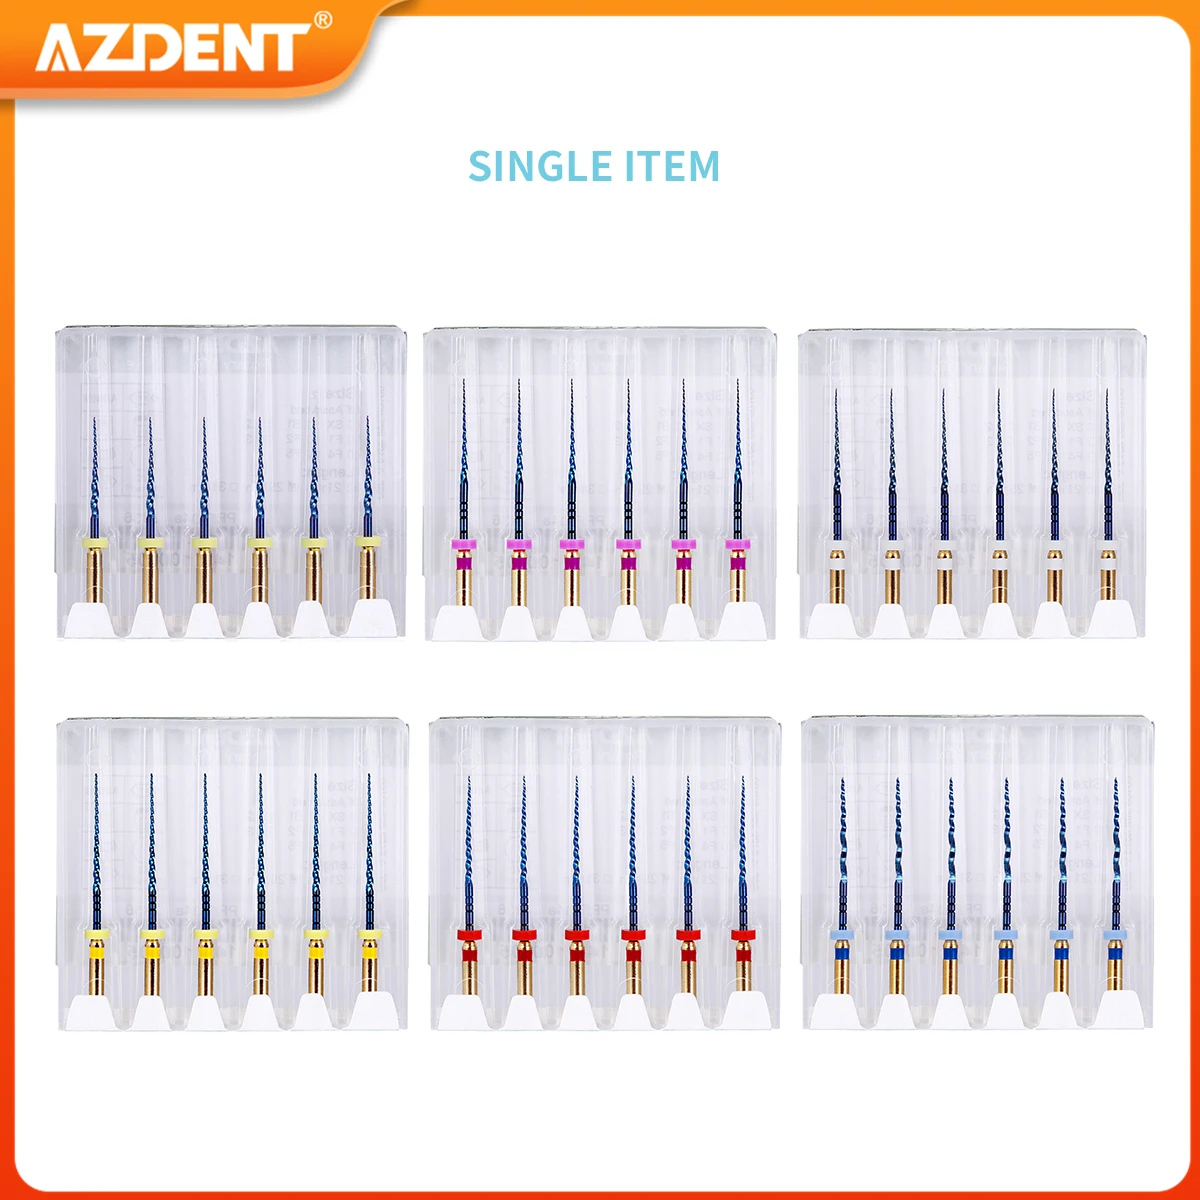 AZDENT 6Pcs/Box Dental Heat Activated Root Canal Files Endodontic Engine Use File NiTi Super Rotary 25mm SX-F3 Dentistry Tools images - 6